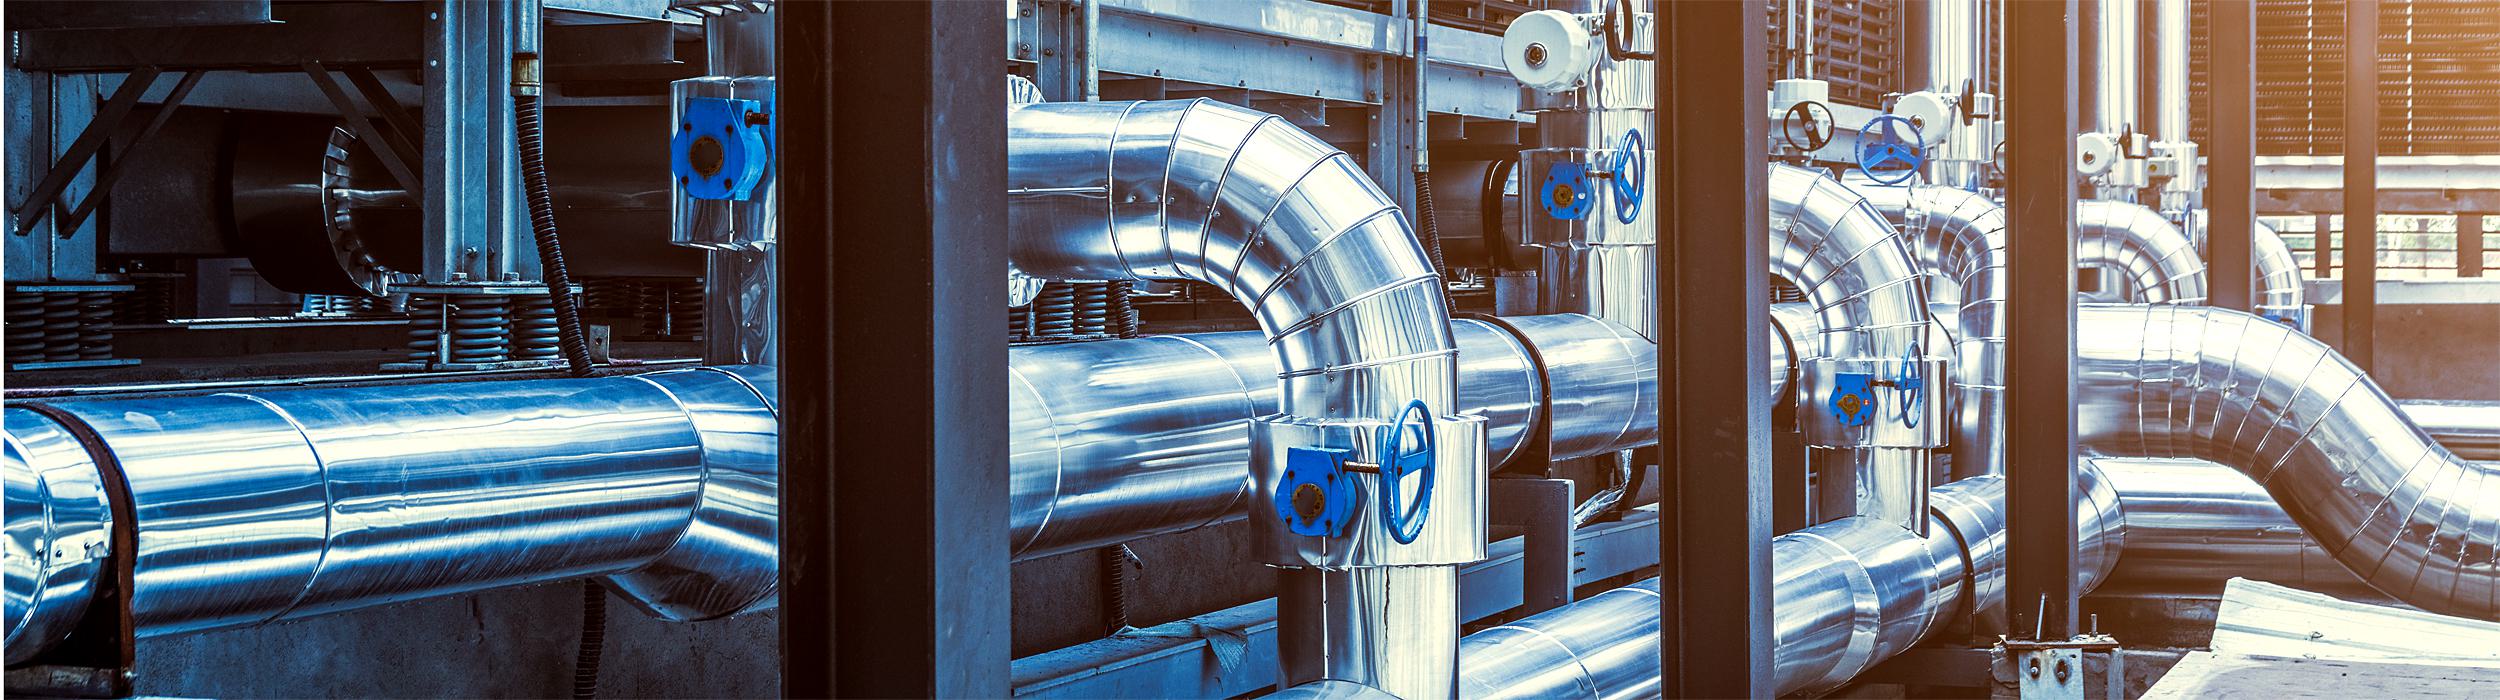 Process cooling for industrial plants